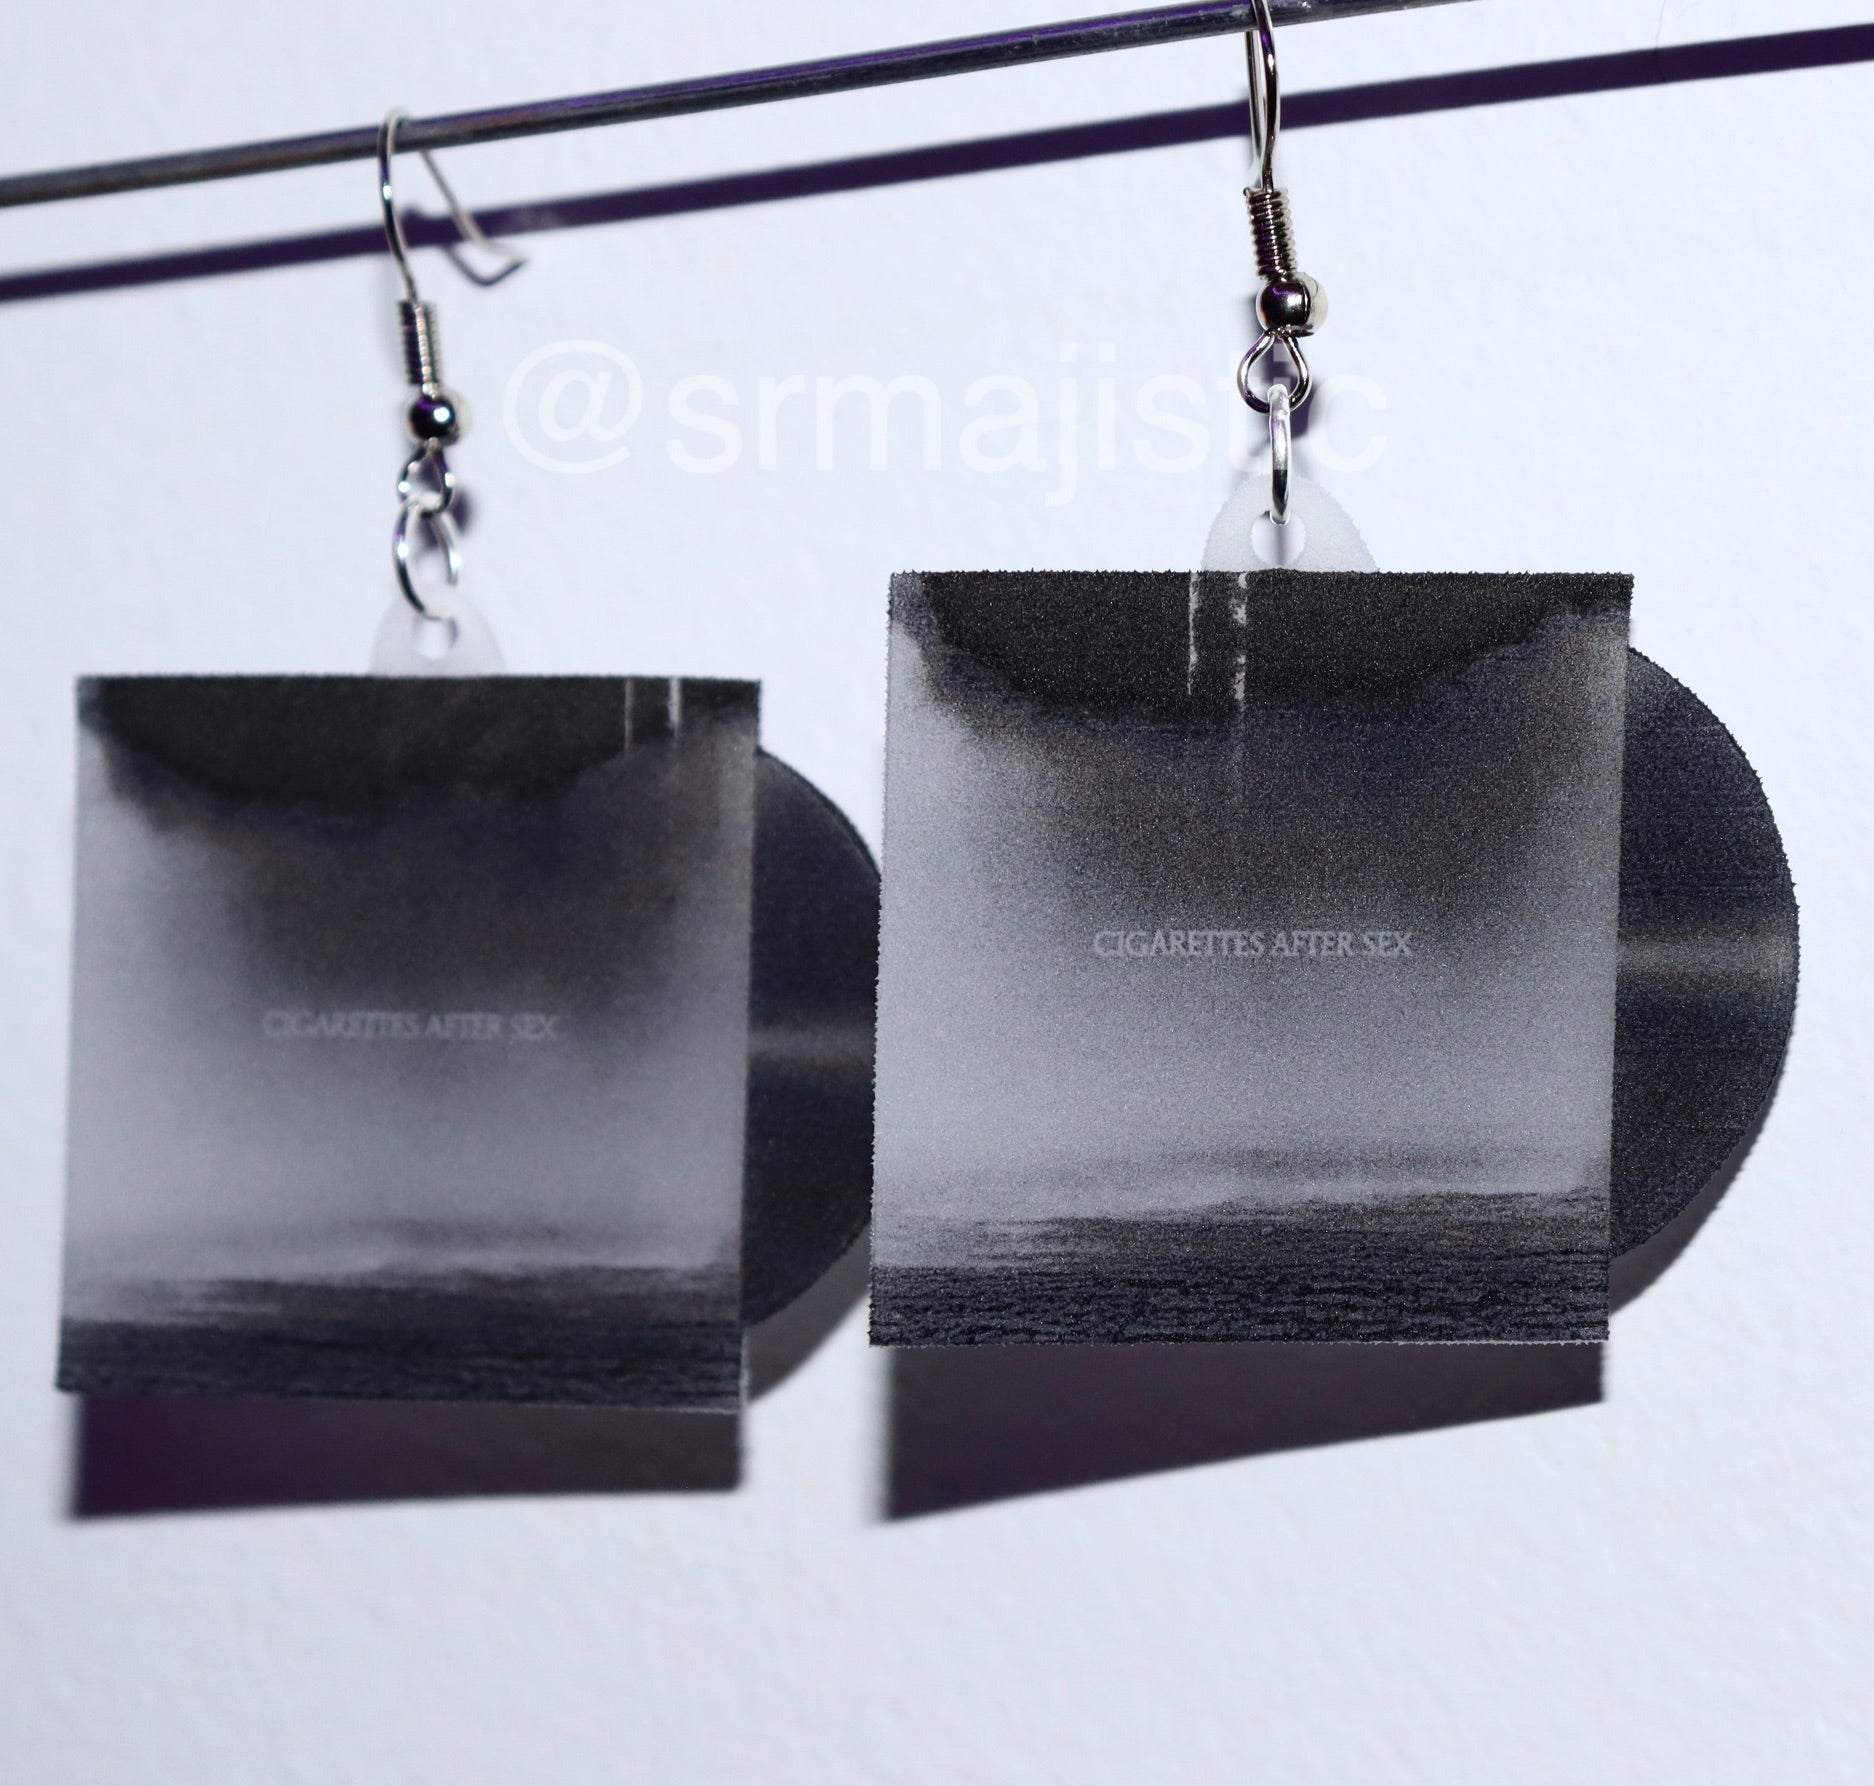 Cigarettes After Sex Cry Vinyl Album Handmade Earrings! picture